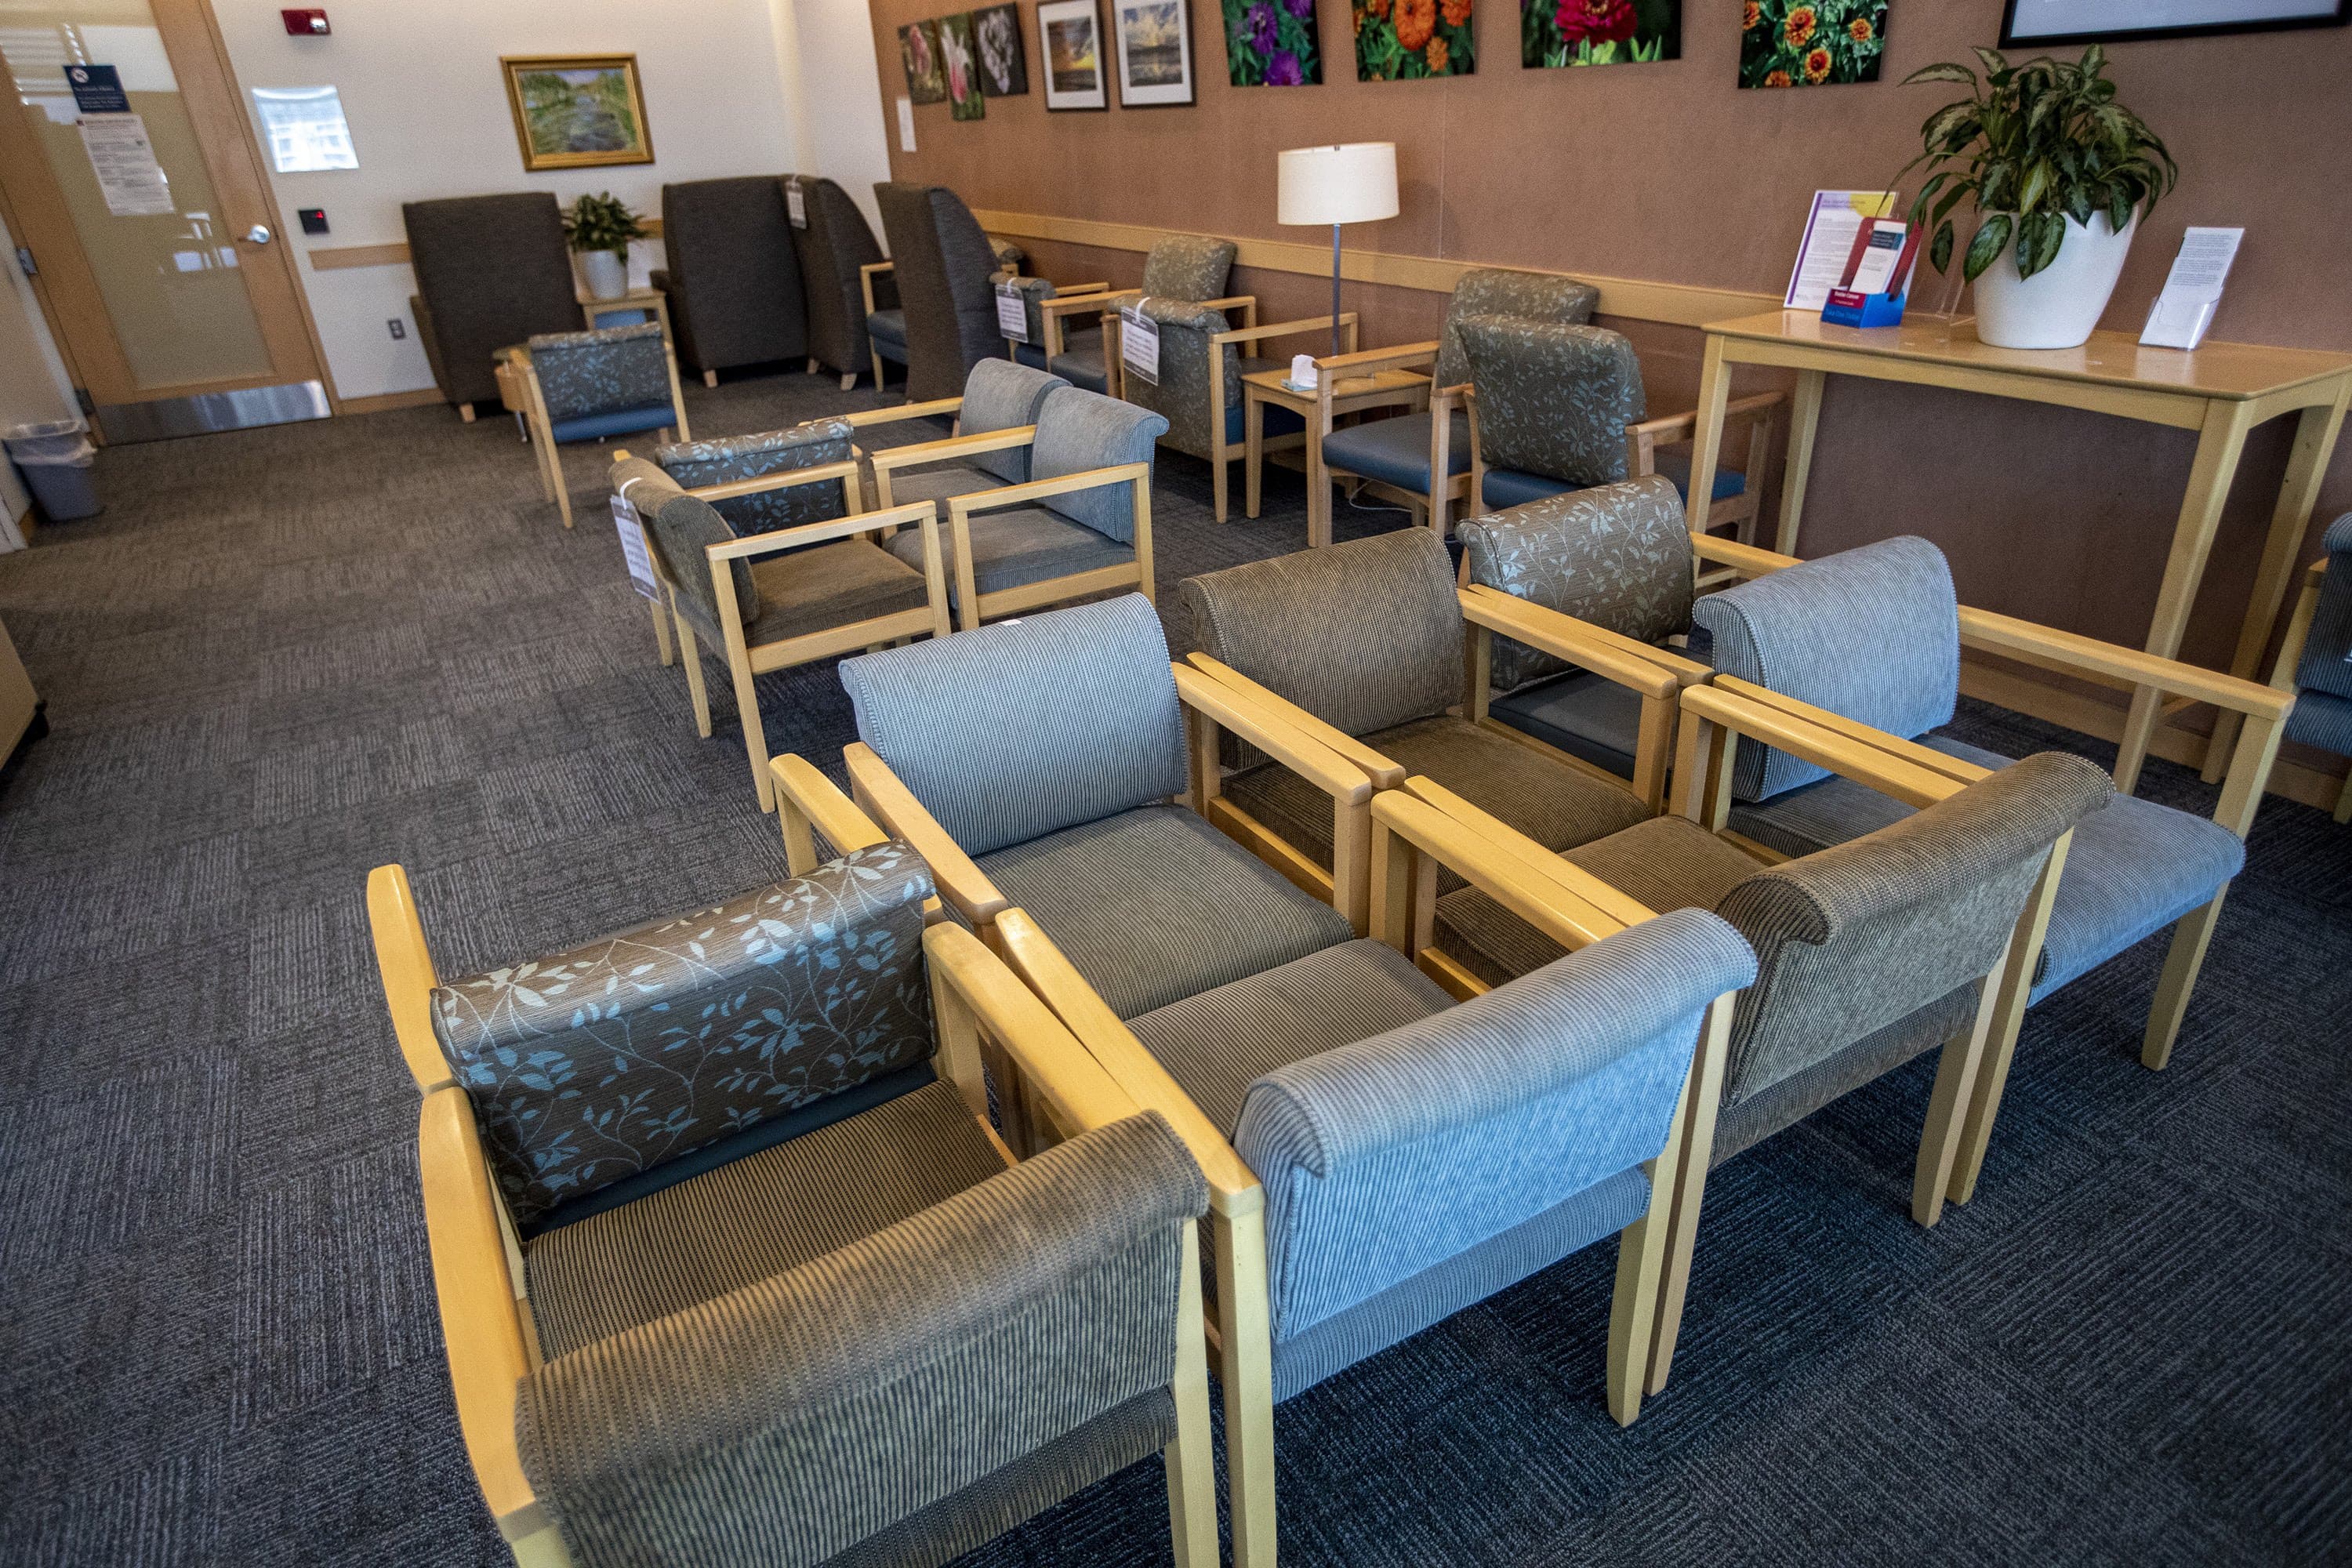 Two views of waiting rooms, carefully engineered to make sure patients are at least six feet apart. (Jesse Costa/WBUR)